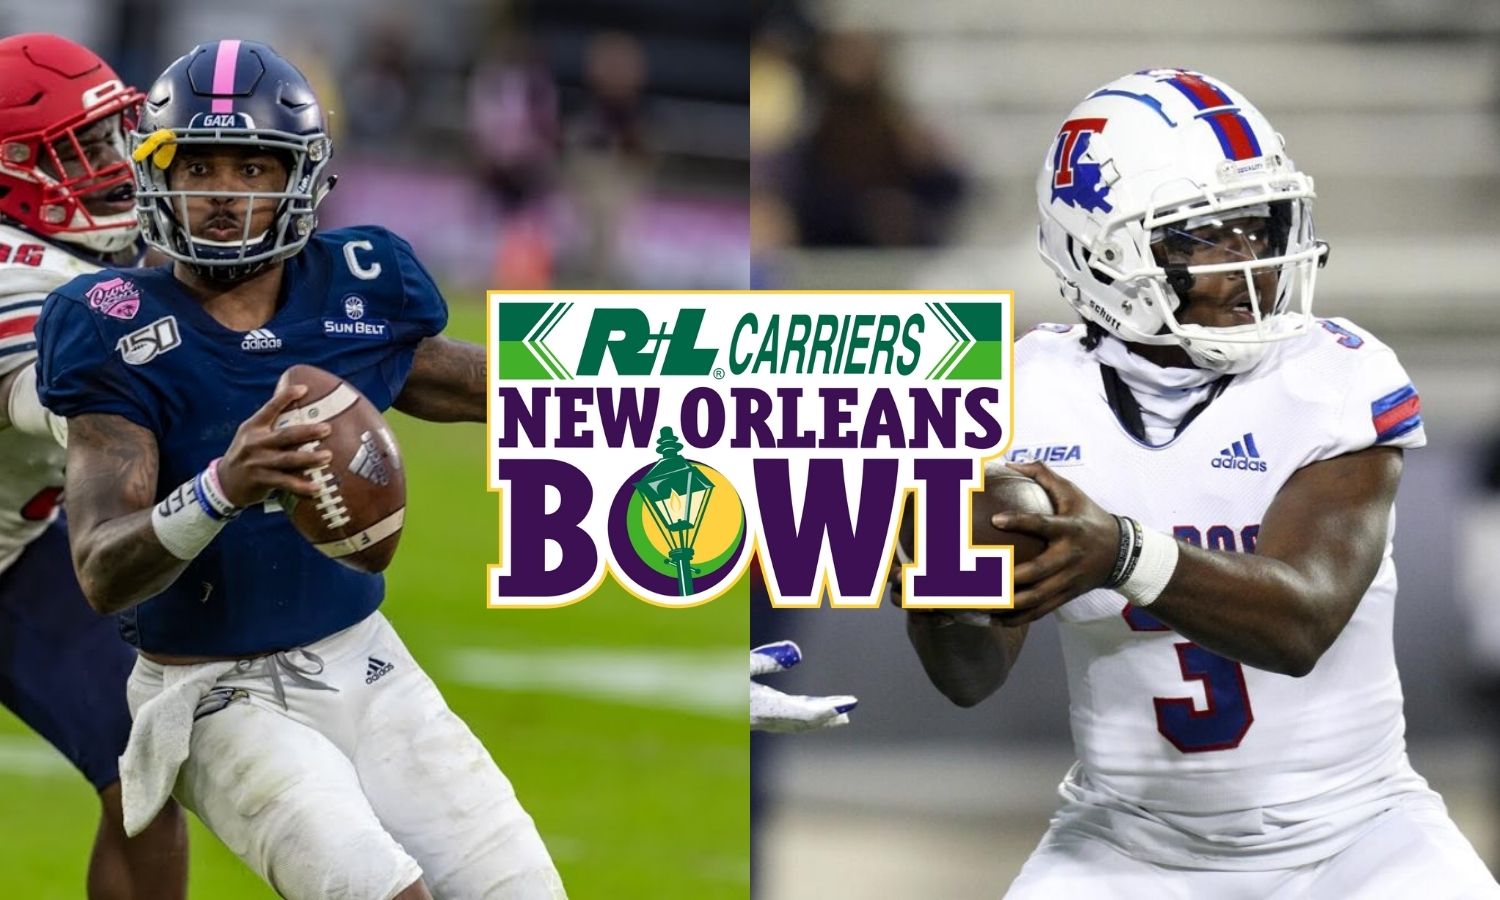 R+L Carriers New Orleans Bowl Louisiana Tech vs. Southern